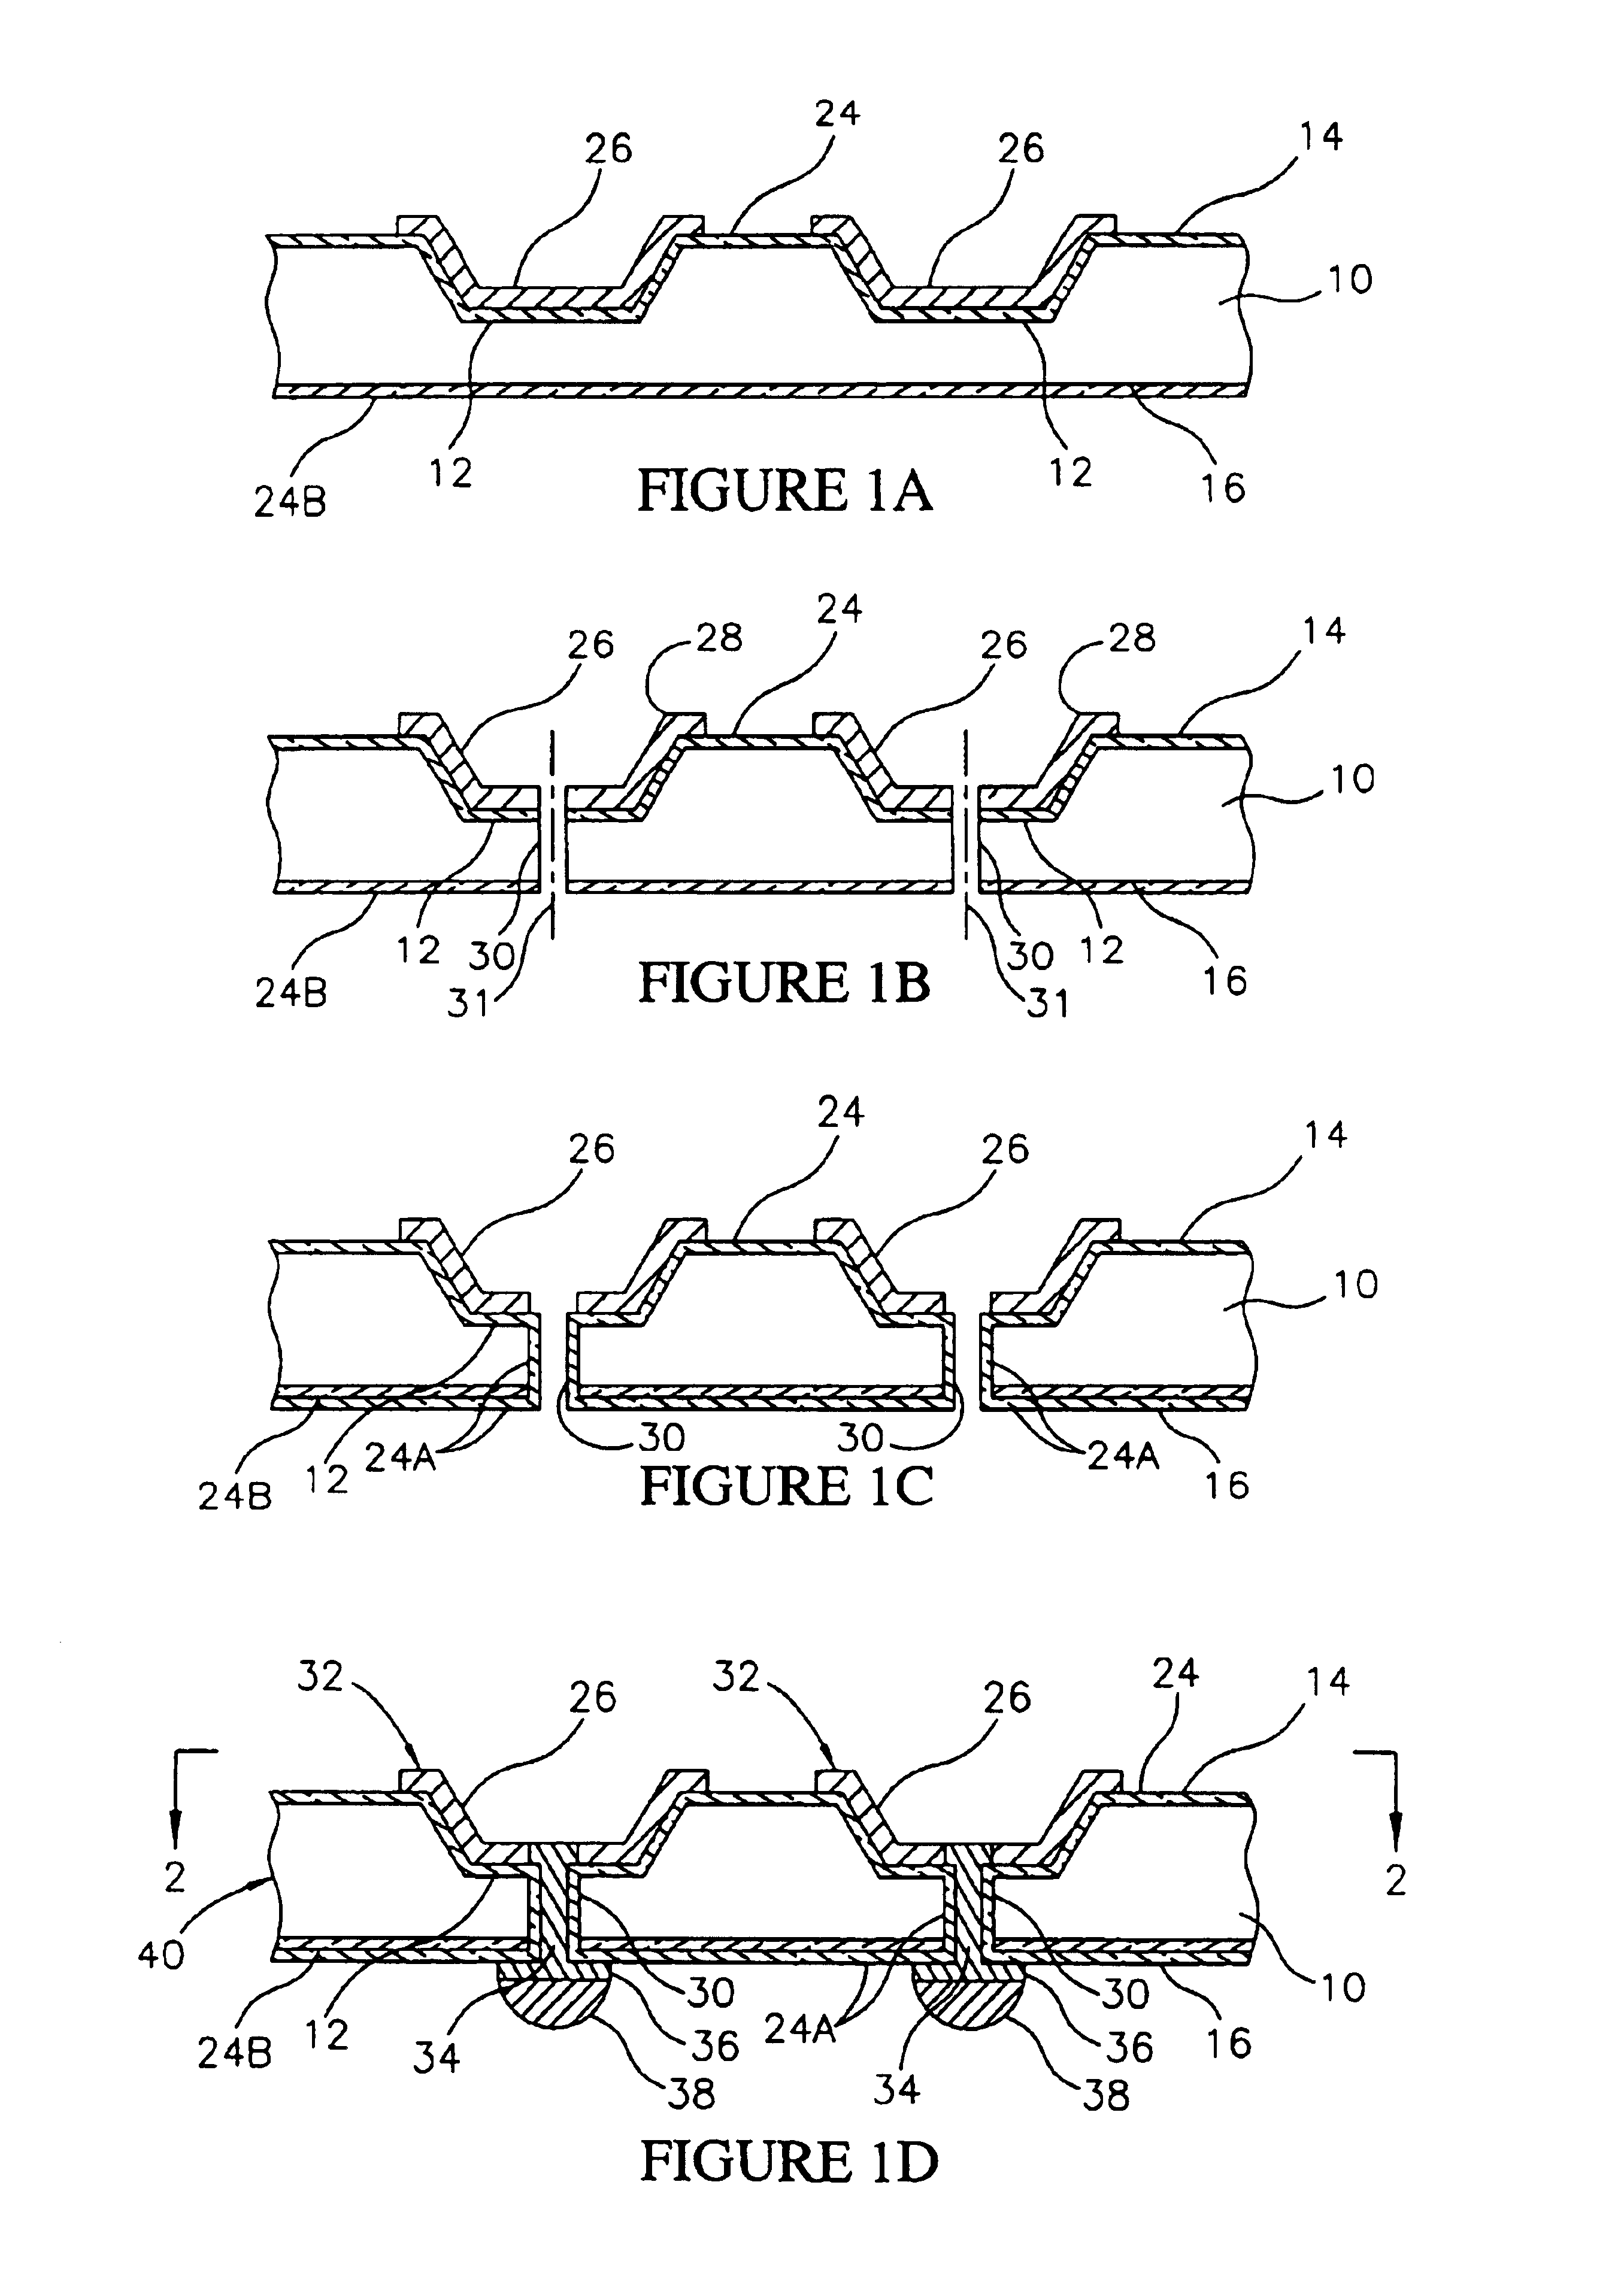 Semiconductor package having interconnect with conductive members